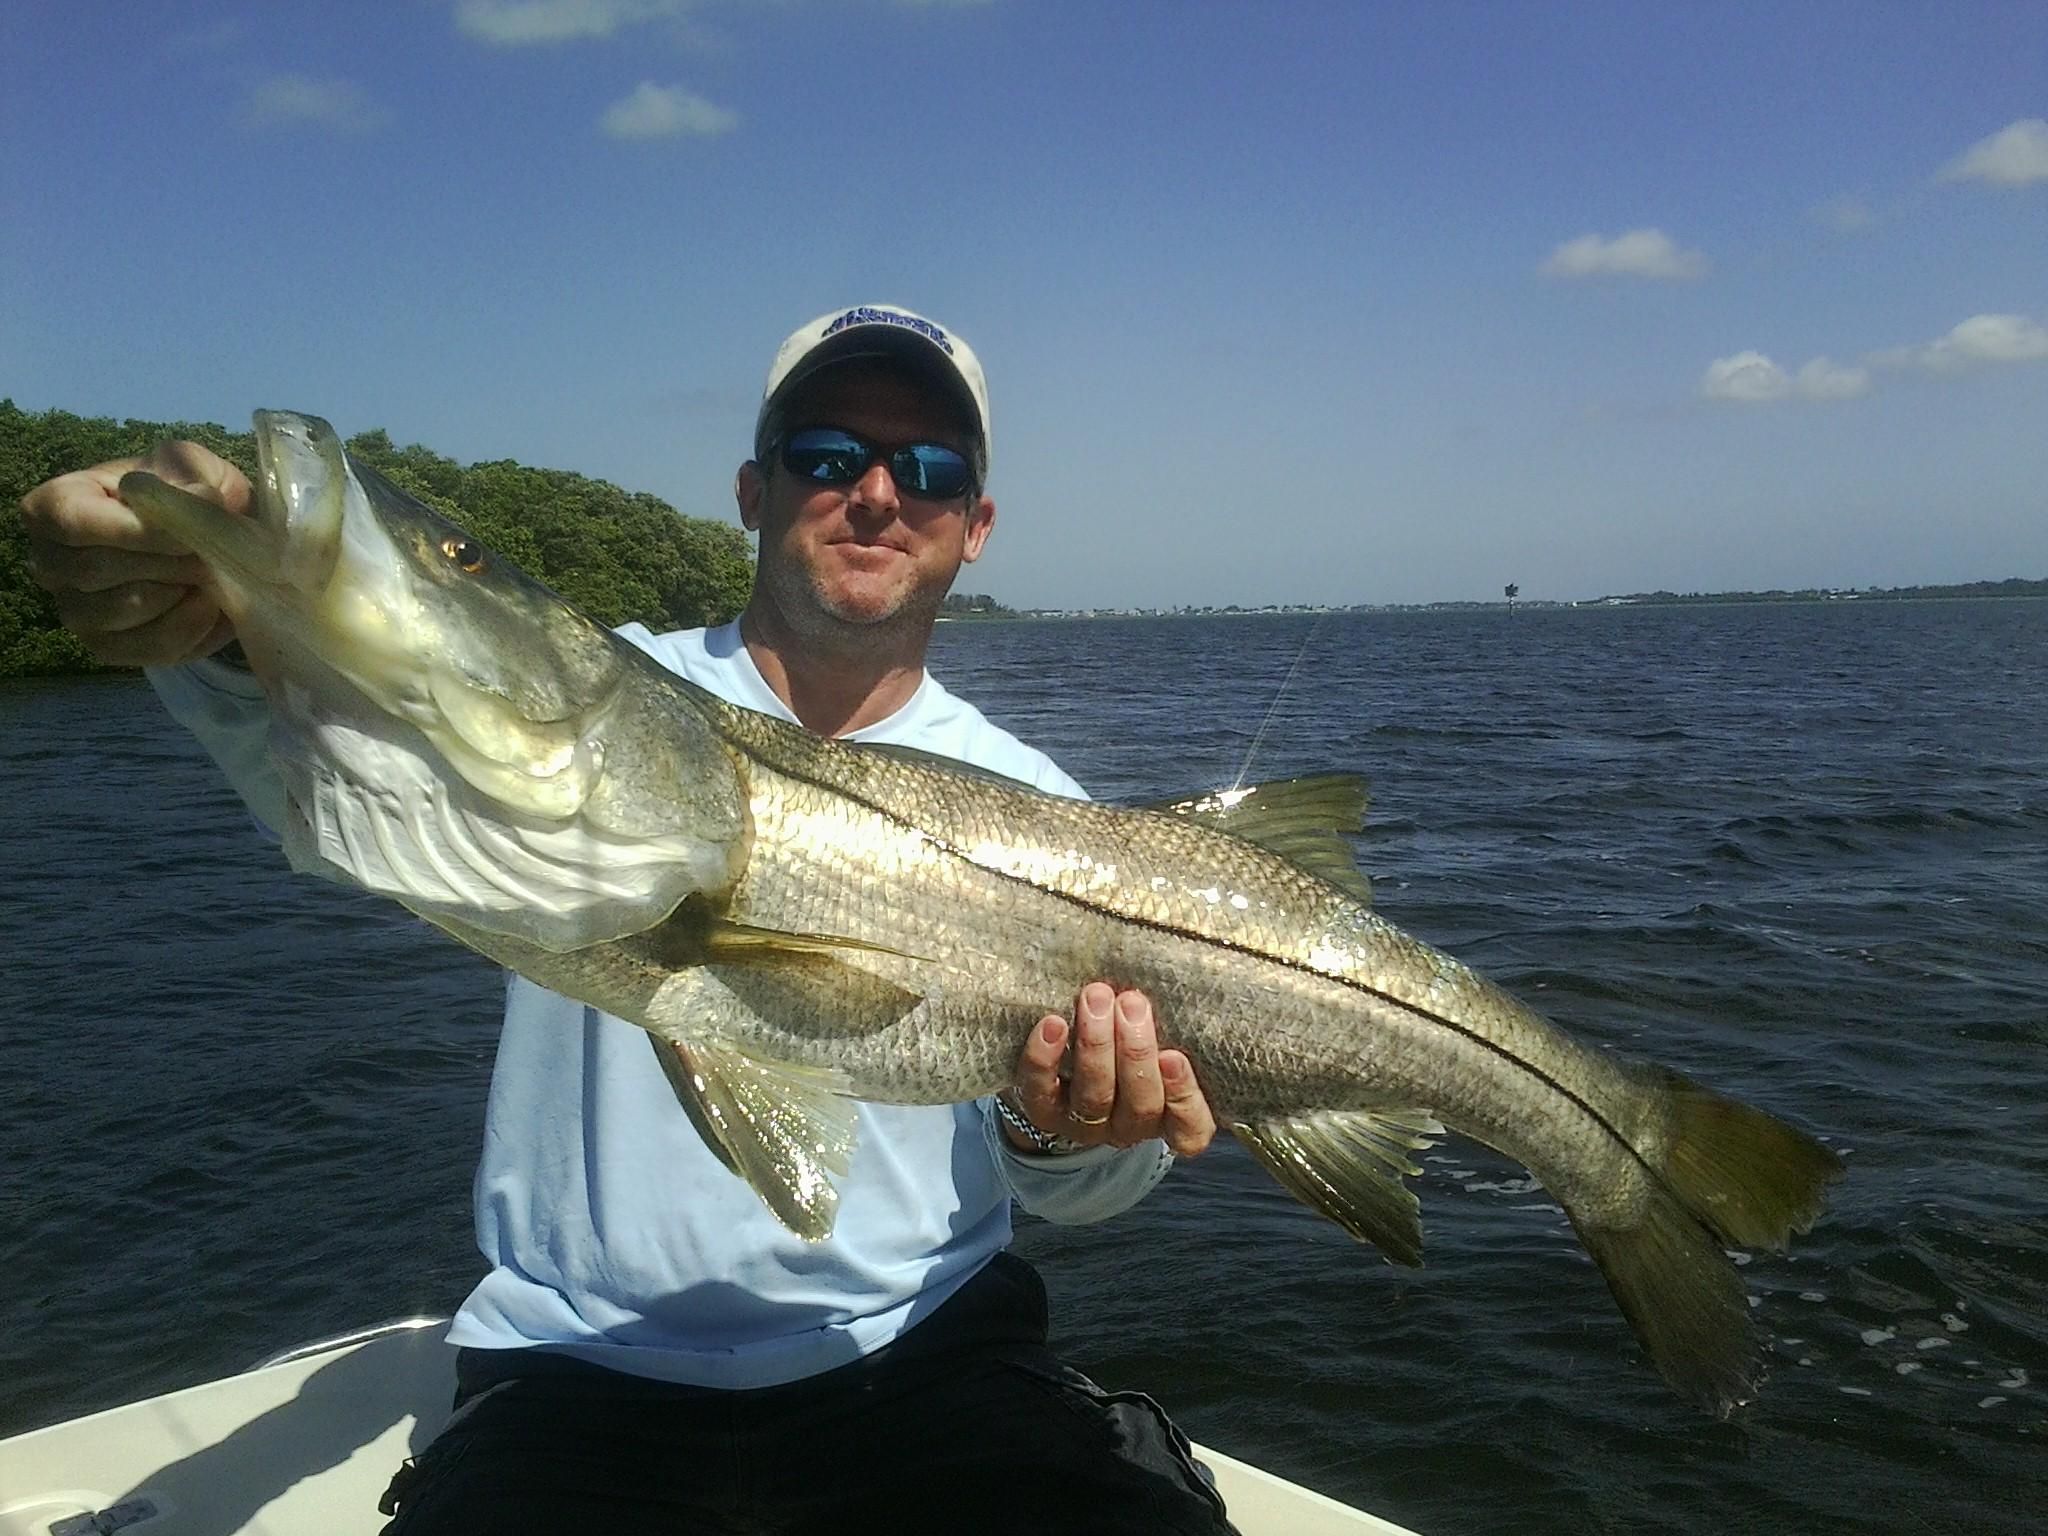 Louisville Fisherman Lands 45-Inch Snook in Lower Tampa Bay ...